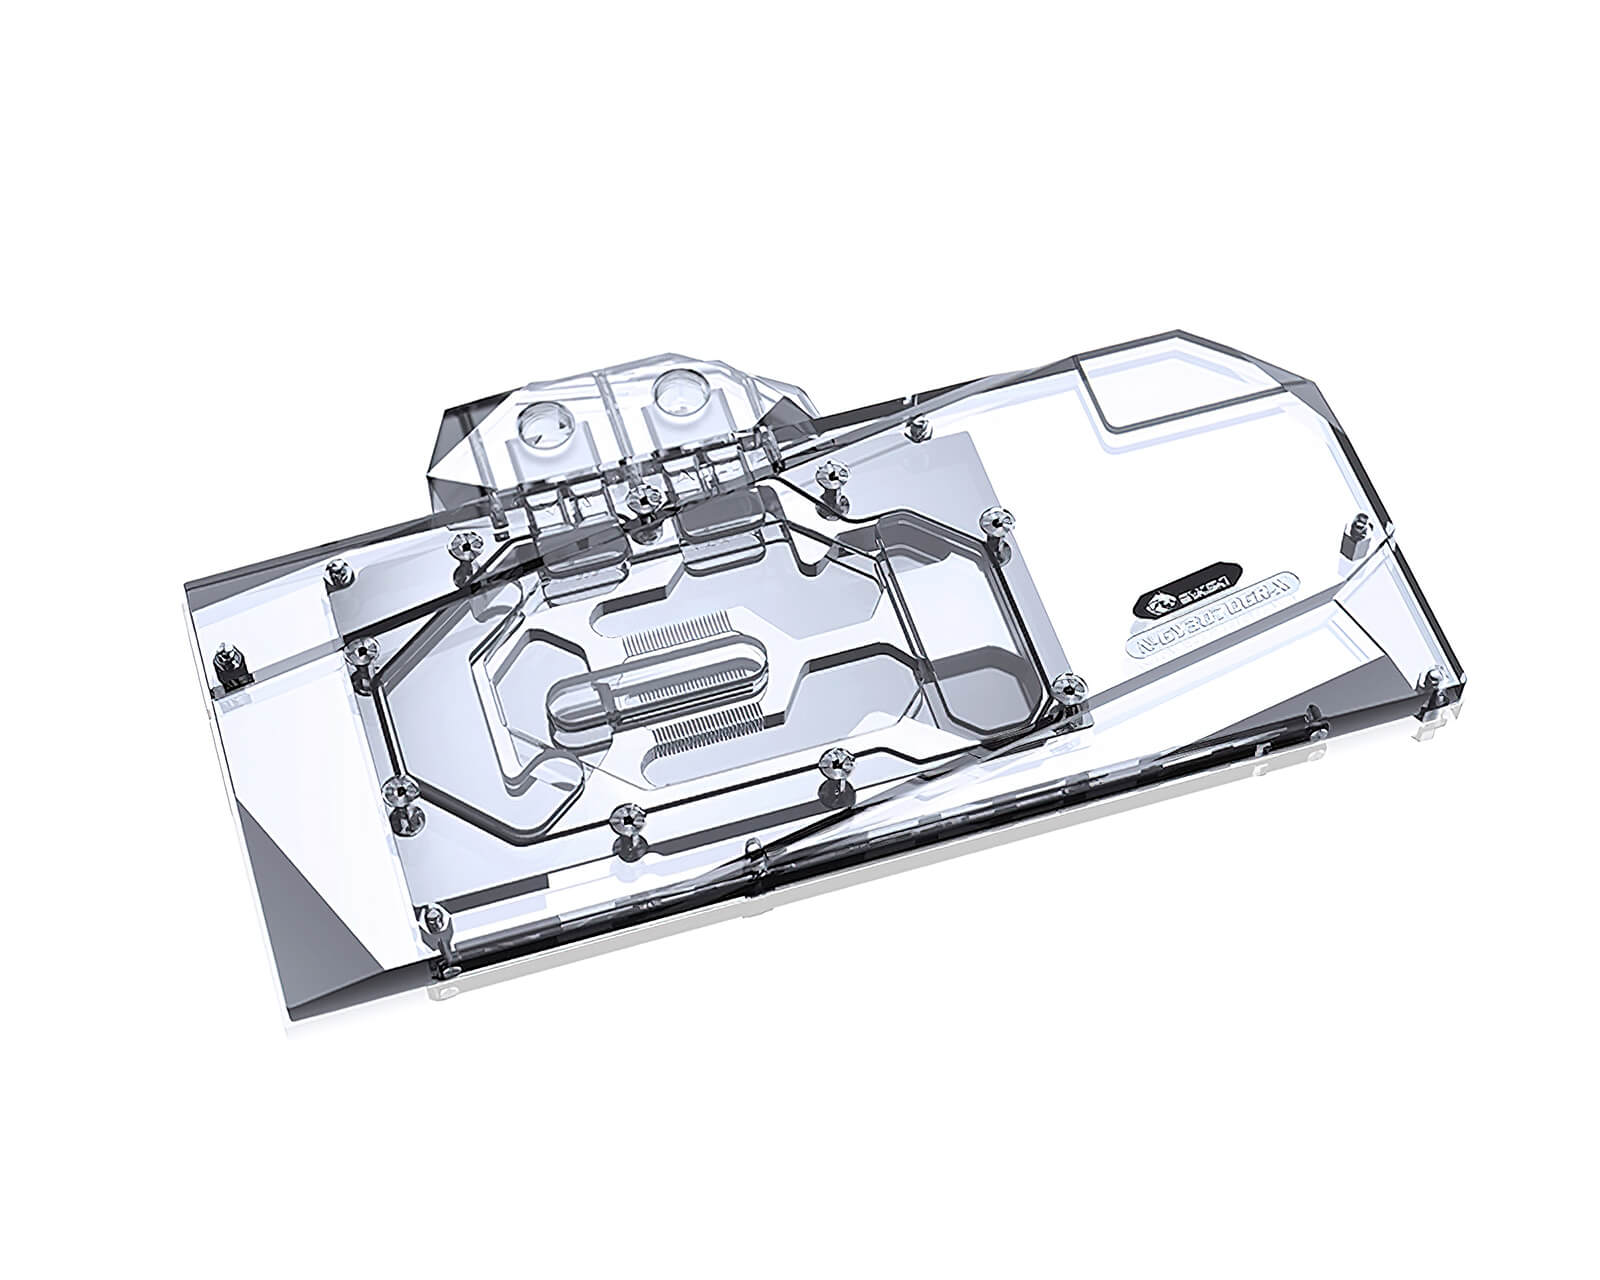 Bykski Full Coverage GPU Water Block and Backplate for GALAXY RTX 3060Ti/3070 GAMER (N-GY3070GR-X) - PrimoChill - KEEPING IT COOL